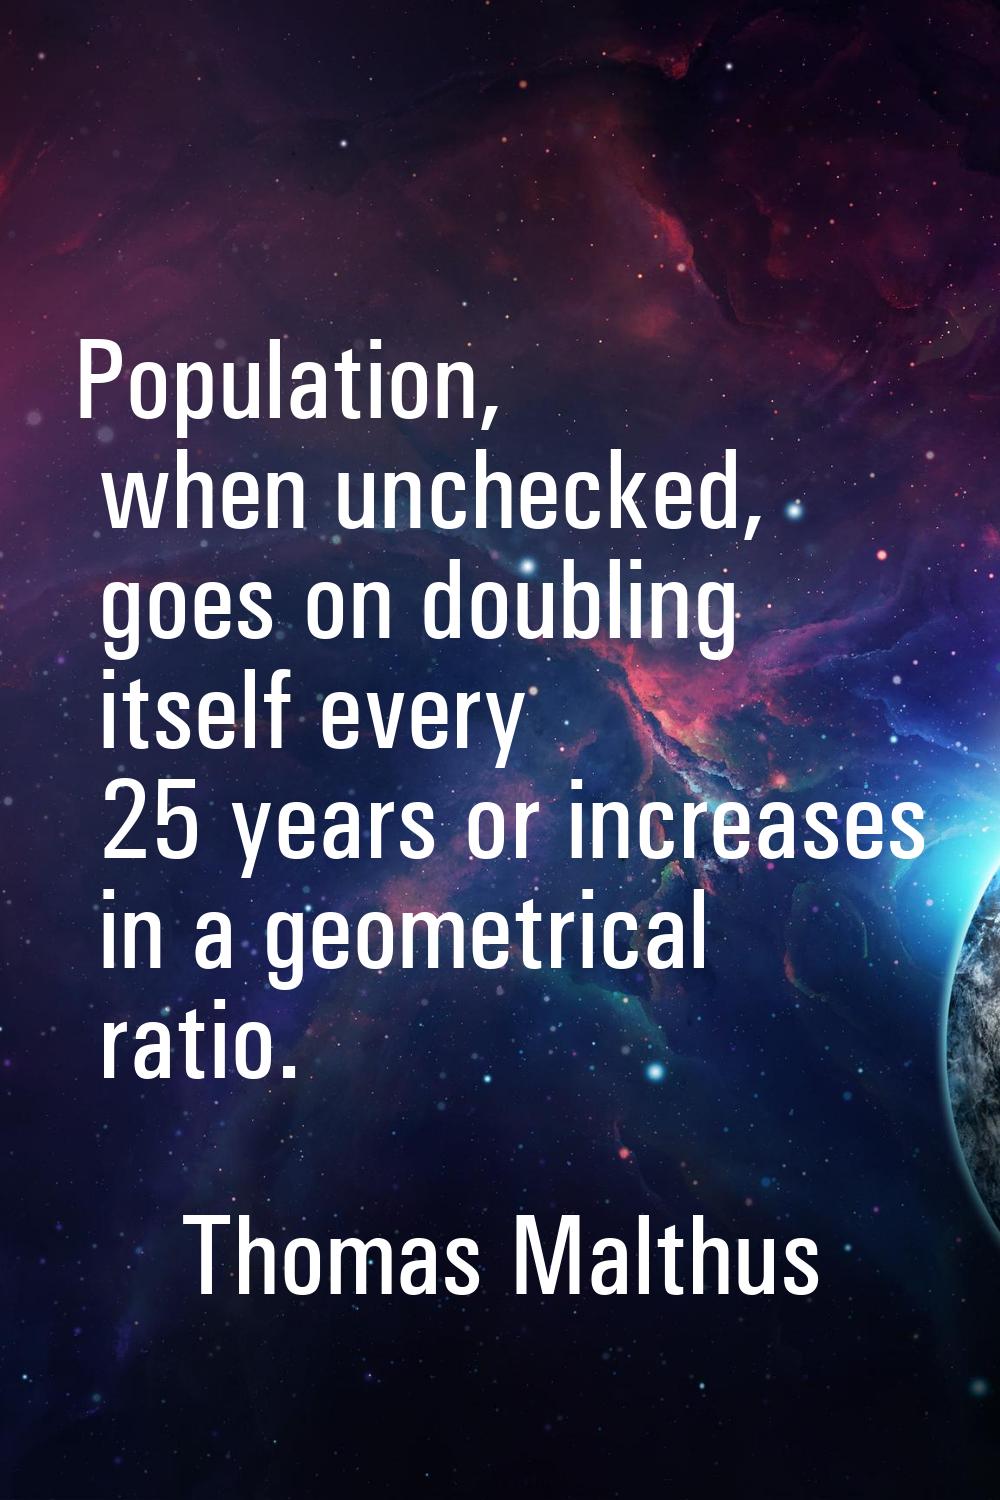 Population, when unchecked, goes on doubling itself every 25 years or increases in a geometrical ra